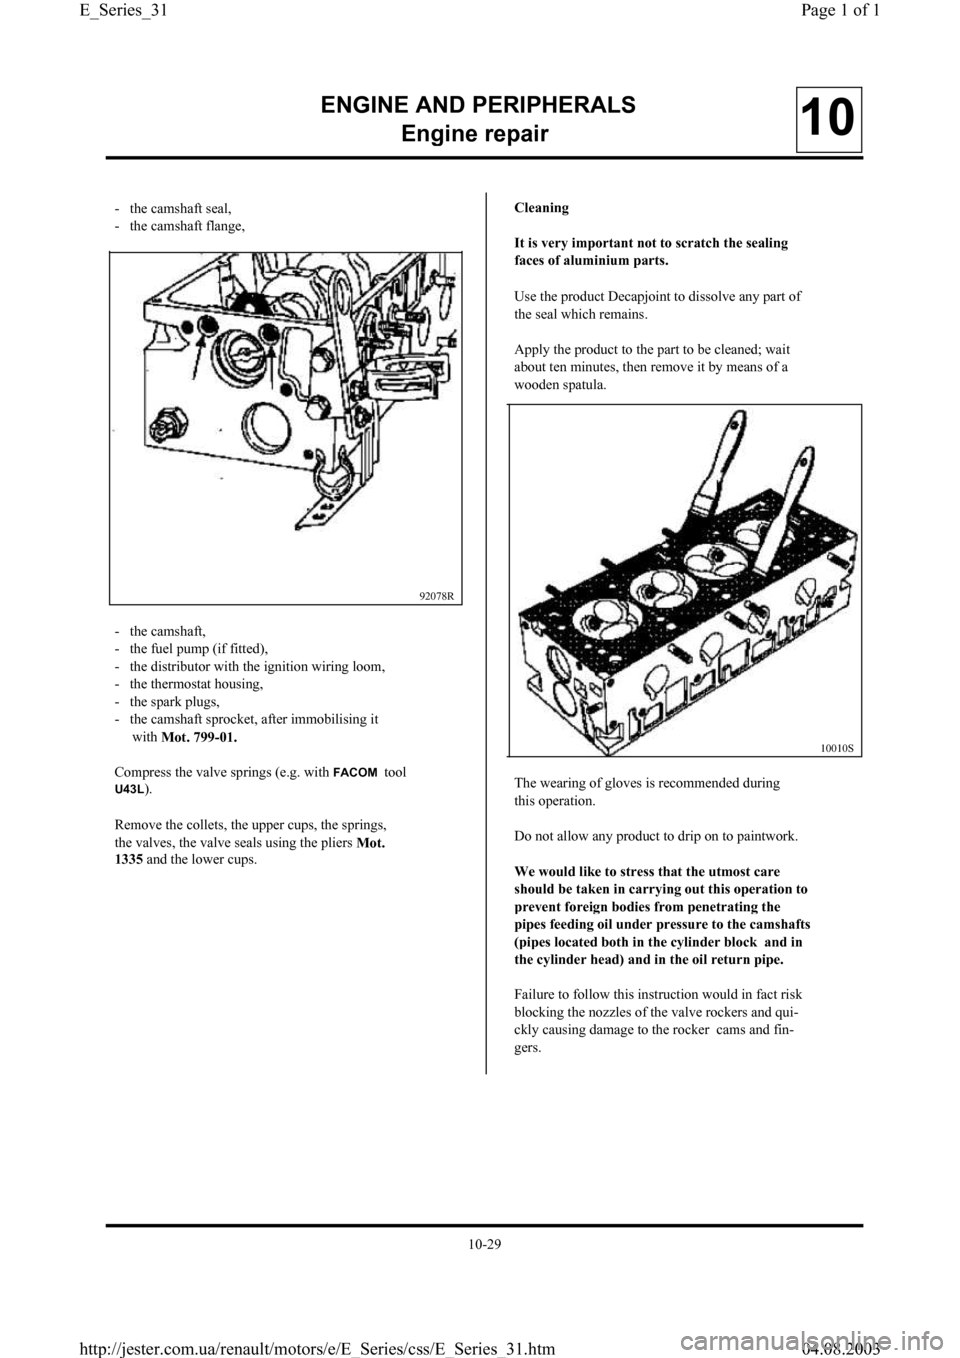 RENAULT CLIO 1997 X57 / 1.G Petrol Engines Workshop Manual ENGINE AND PERIPHERALS
En
gine repair10
-   the camshaft seal,
-   the camshaft flange,
92078R
10010S
-   the camshaft,
-   the fuel pump (if fitted),
-   the distributor with the ignition wiring loom